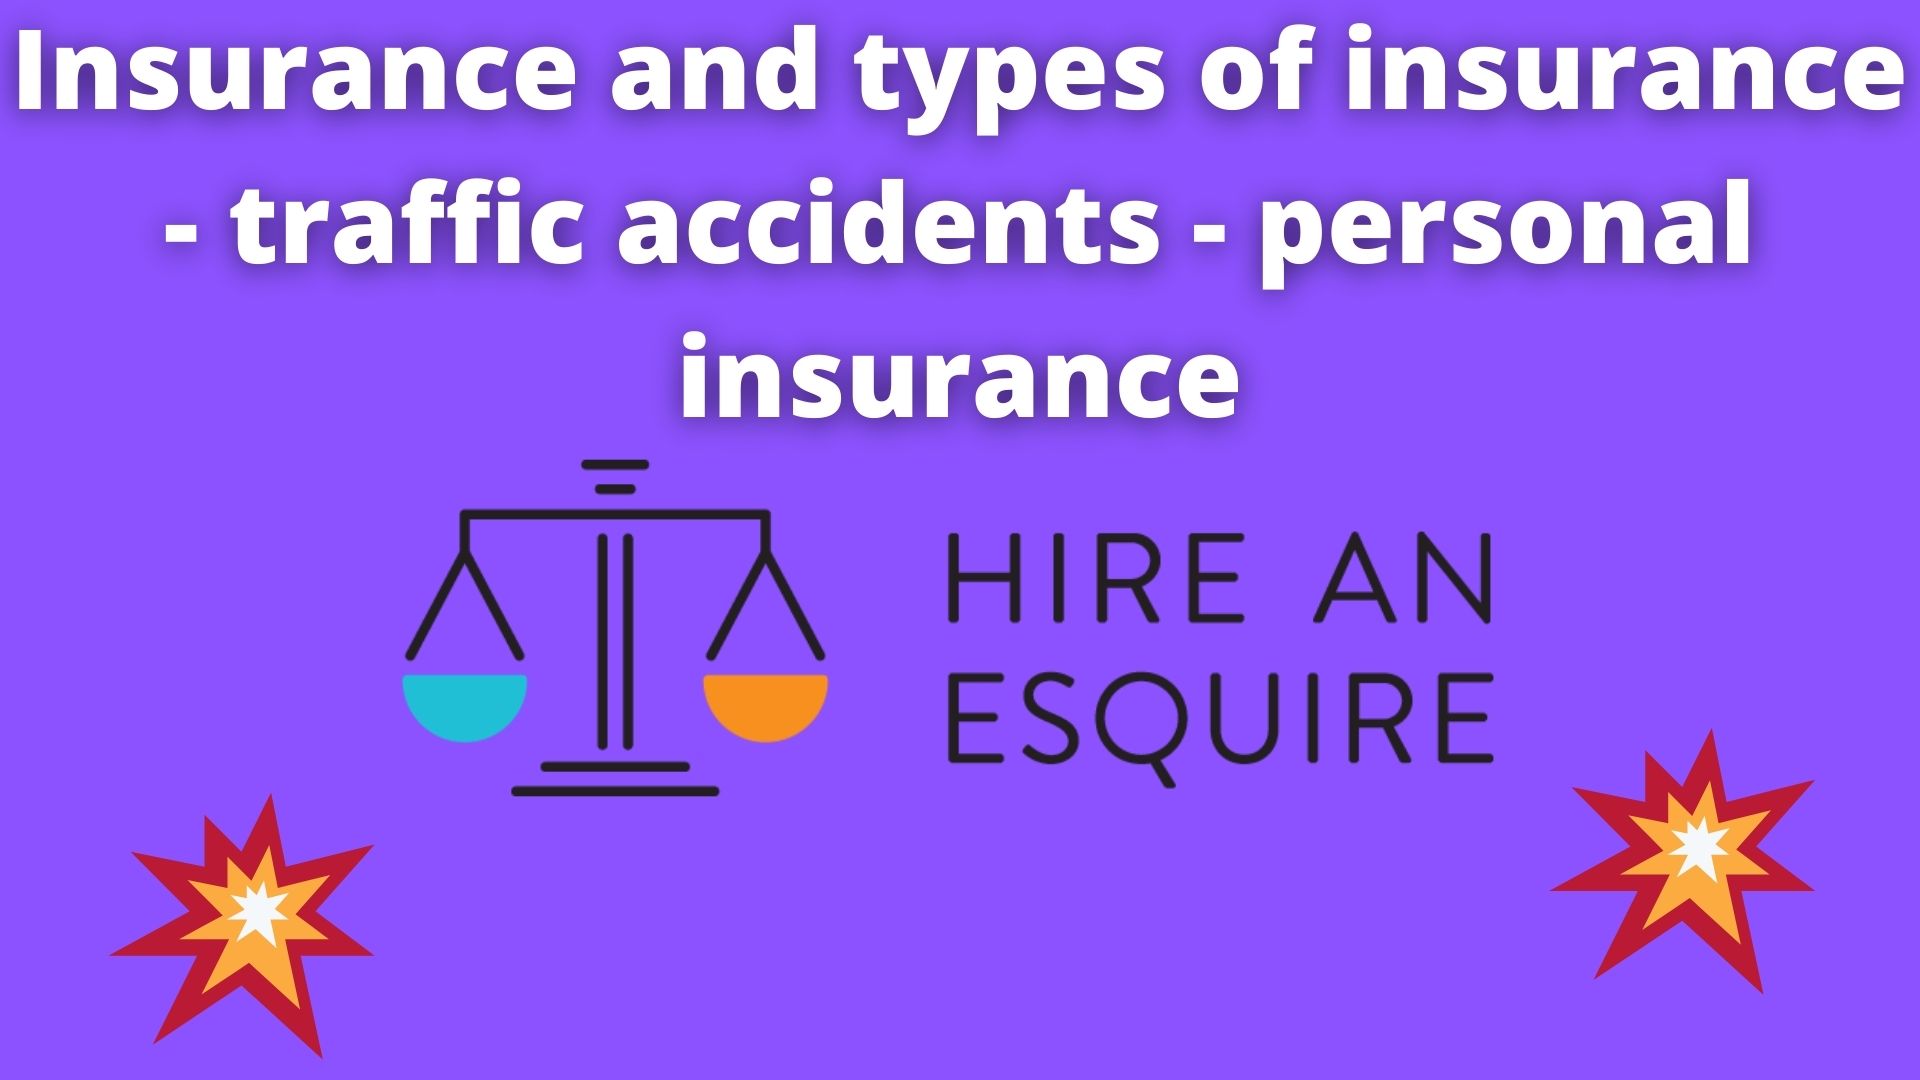 Insurance And Types Of Insurance - Traffic Accidents - Personal Insurance